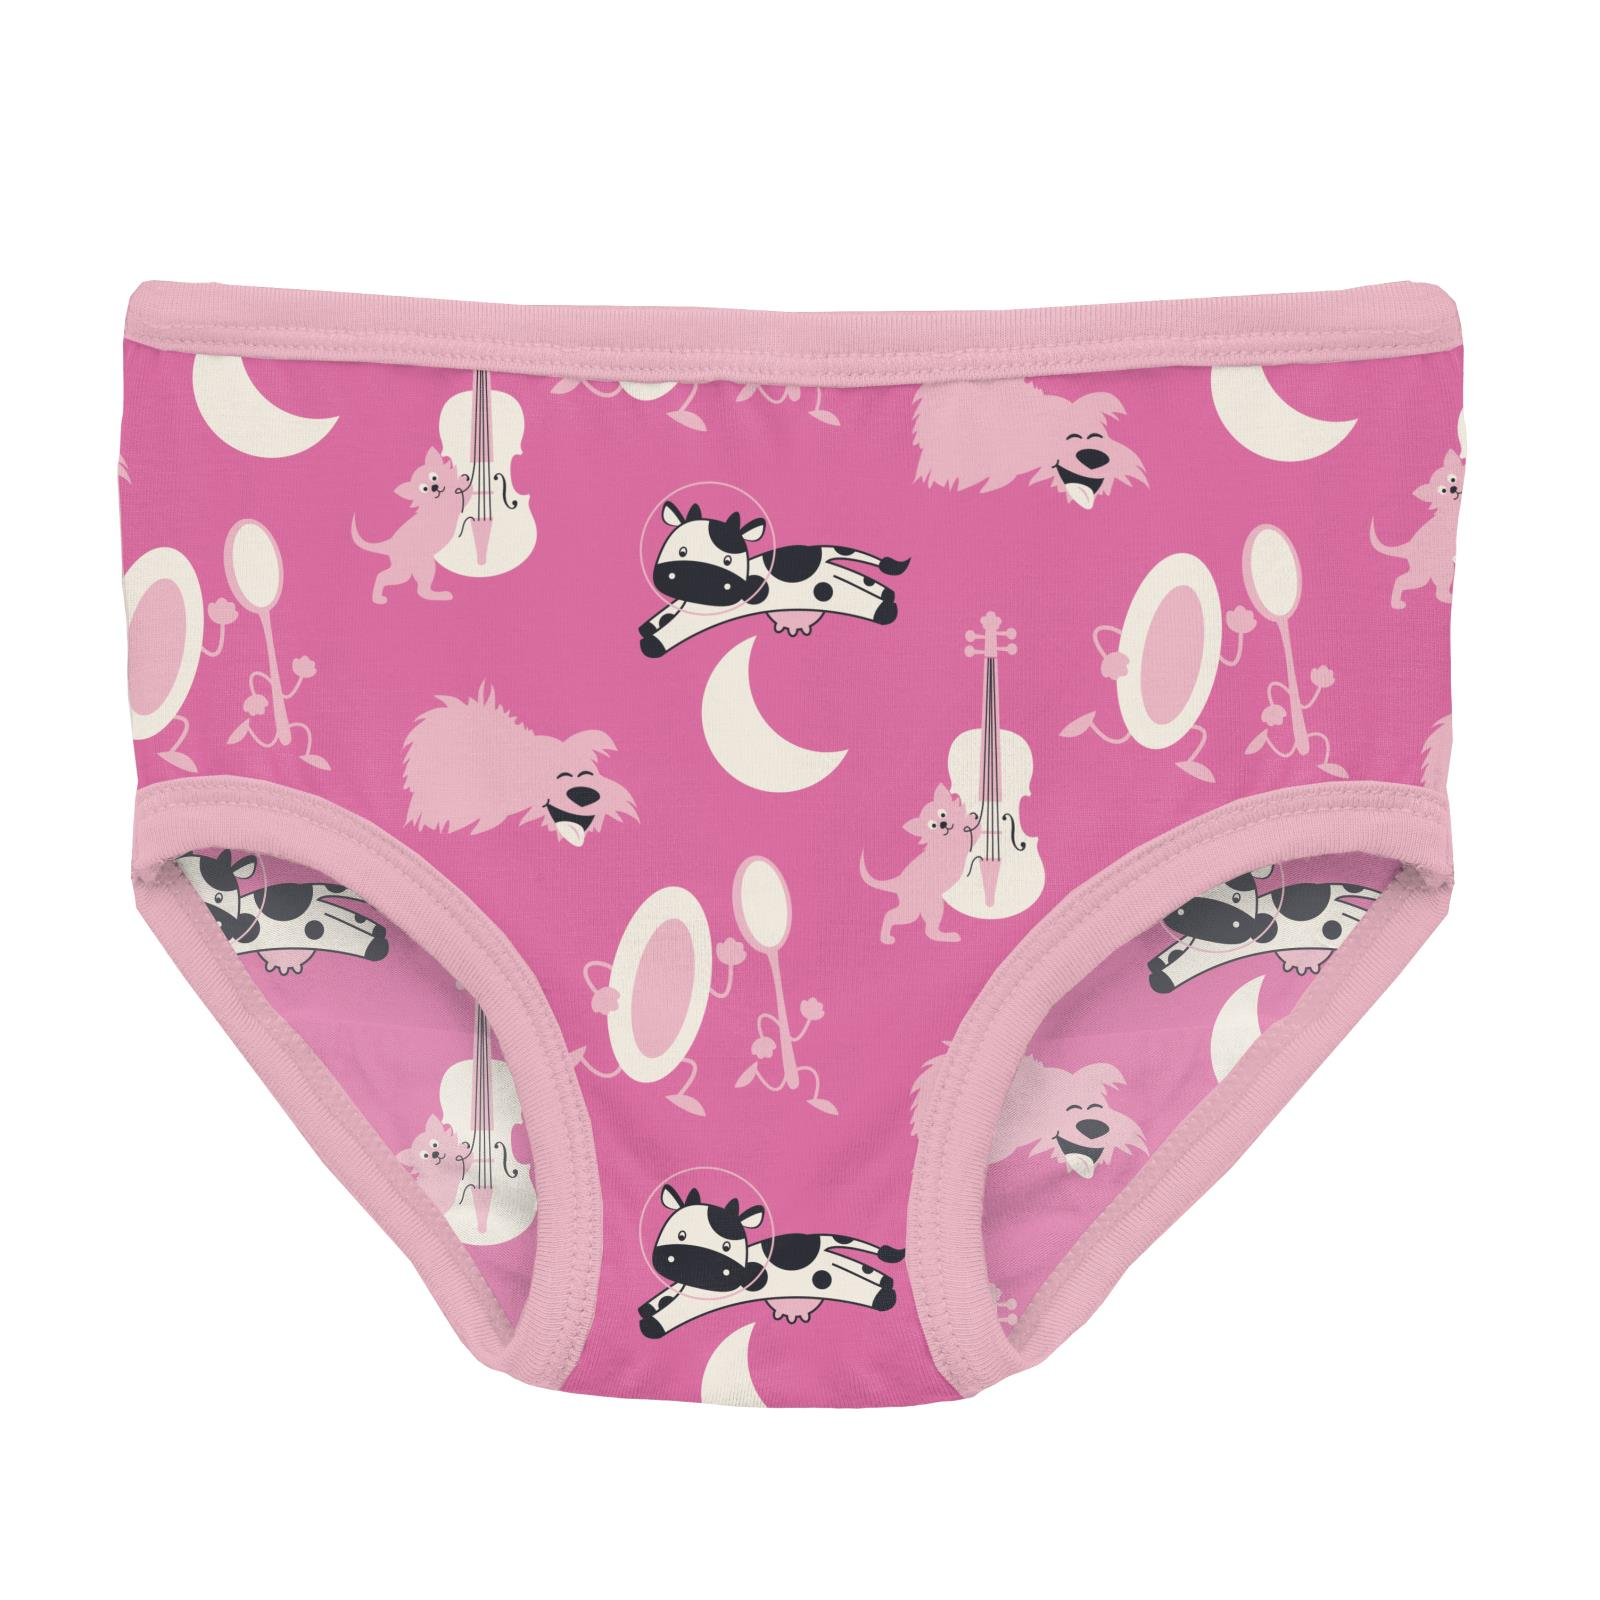 KicKee Pants Girls Underwear, Set of 3, Prints and Solid Colors